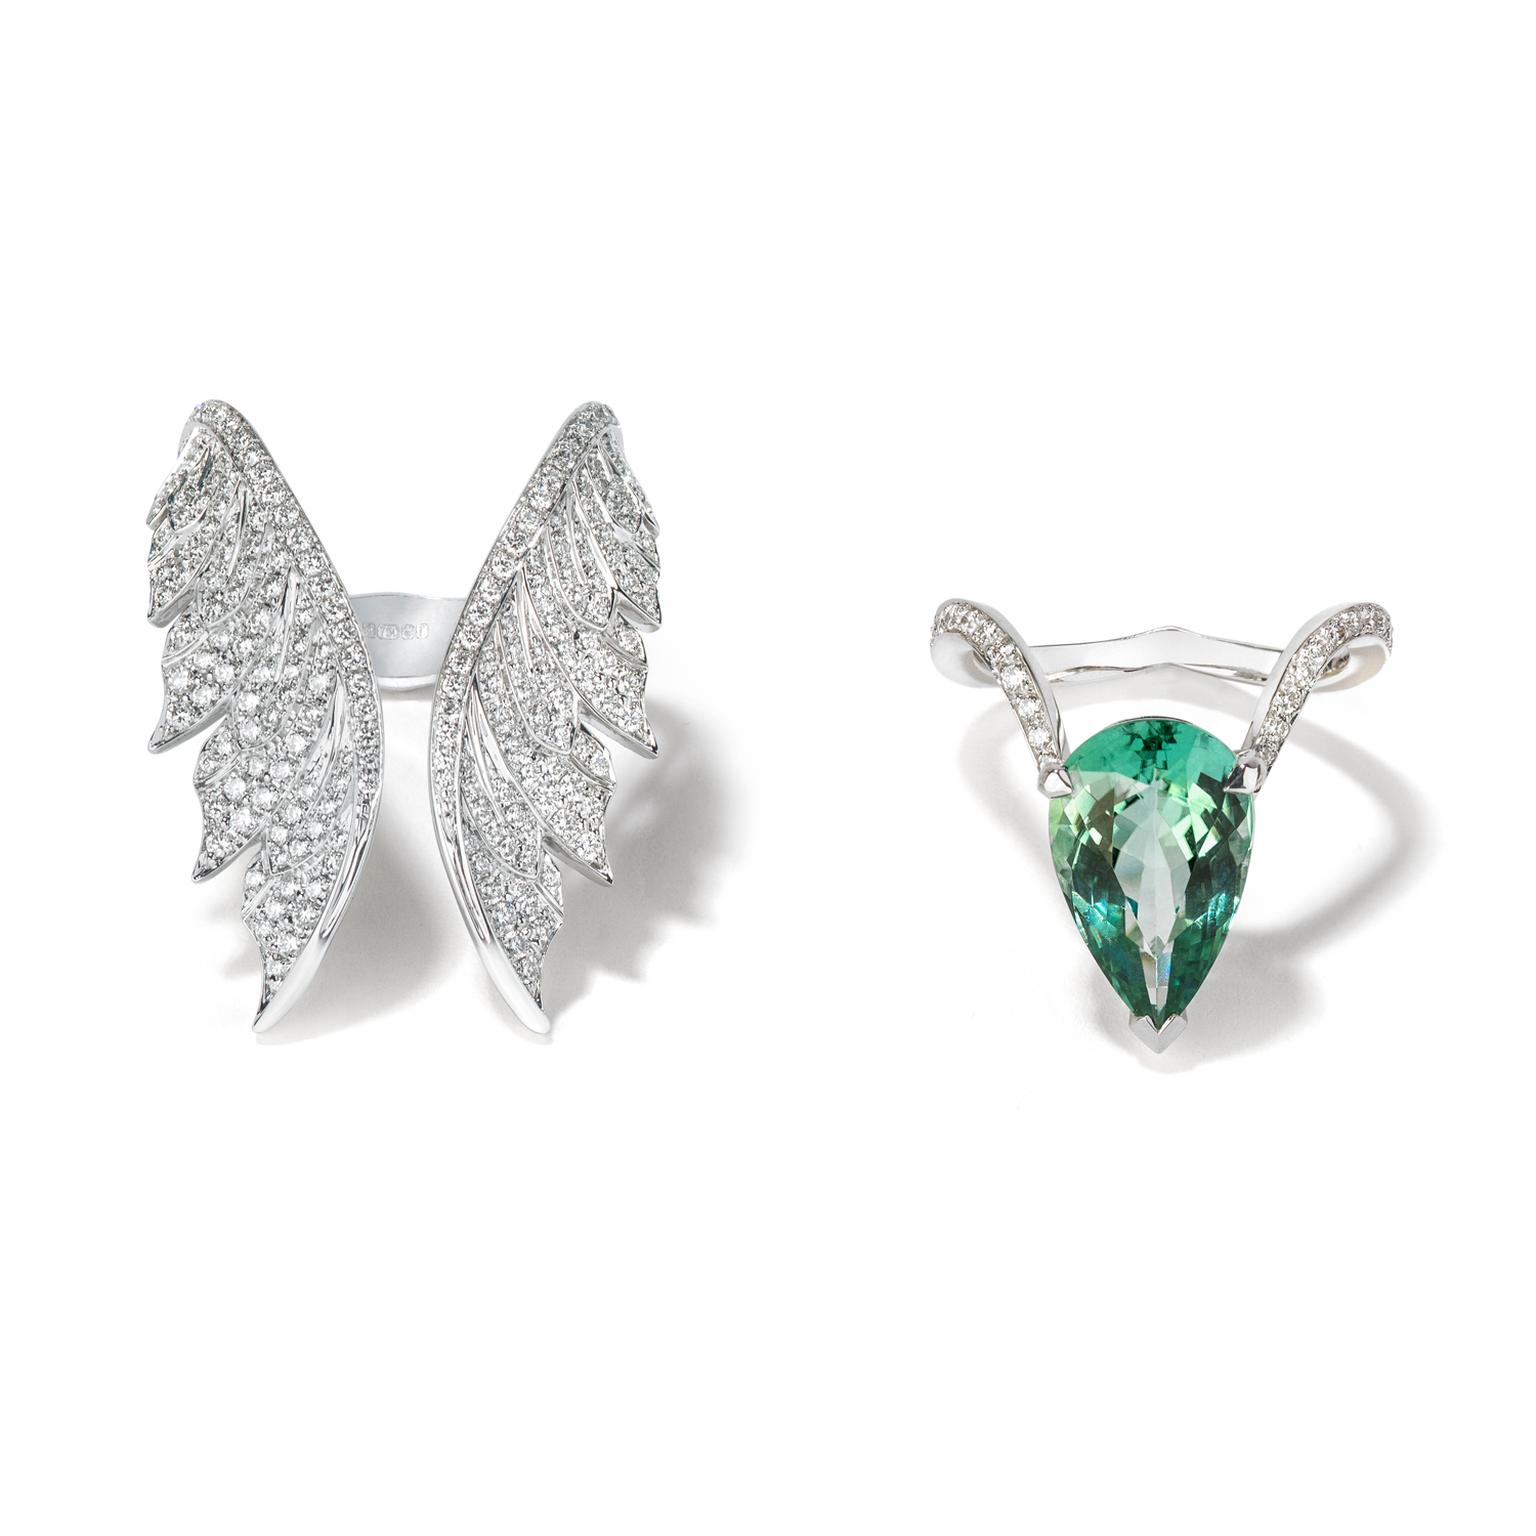 Stephen Webster Magnipheasant tourmaline cocktail ring with open feather ring